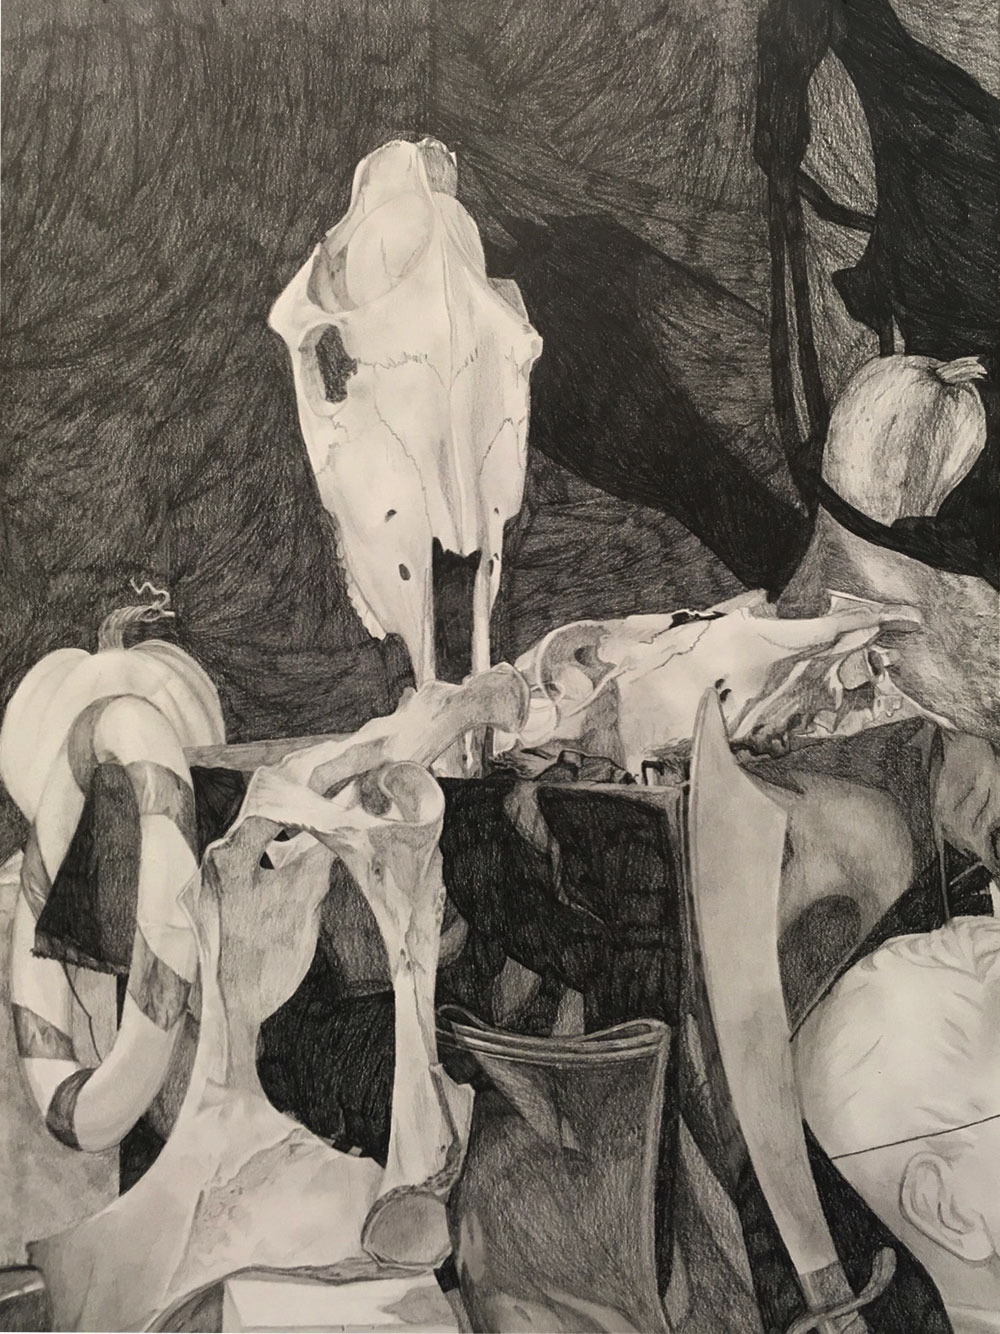 Still life drawing out of charcoal - specifically focused in on a skull, bones, a sword.